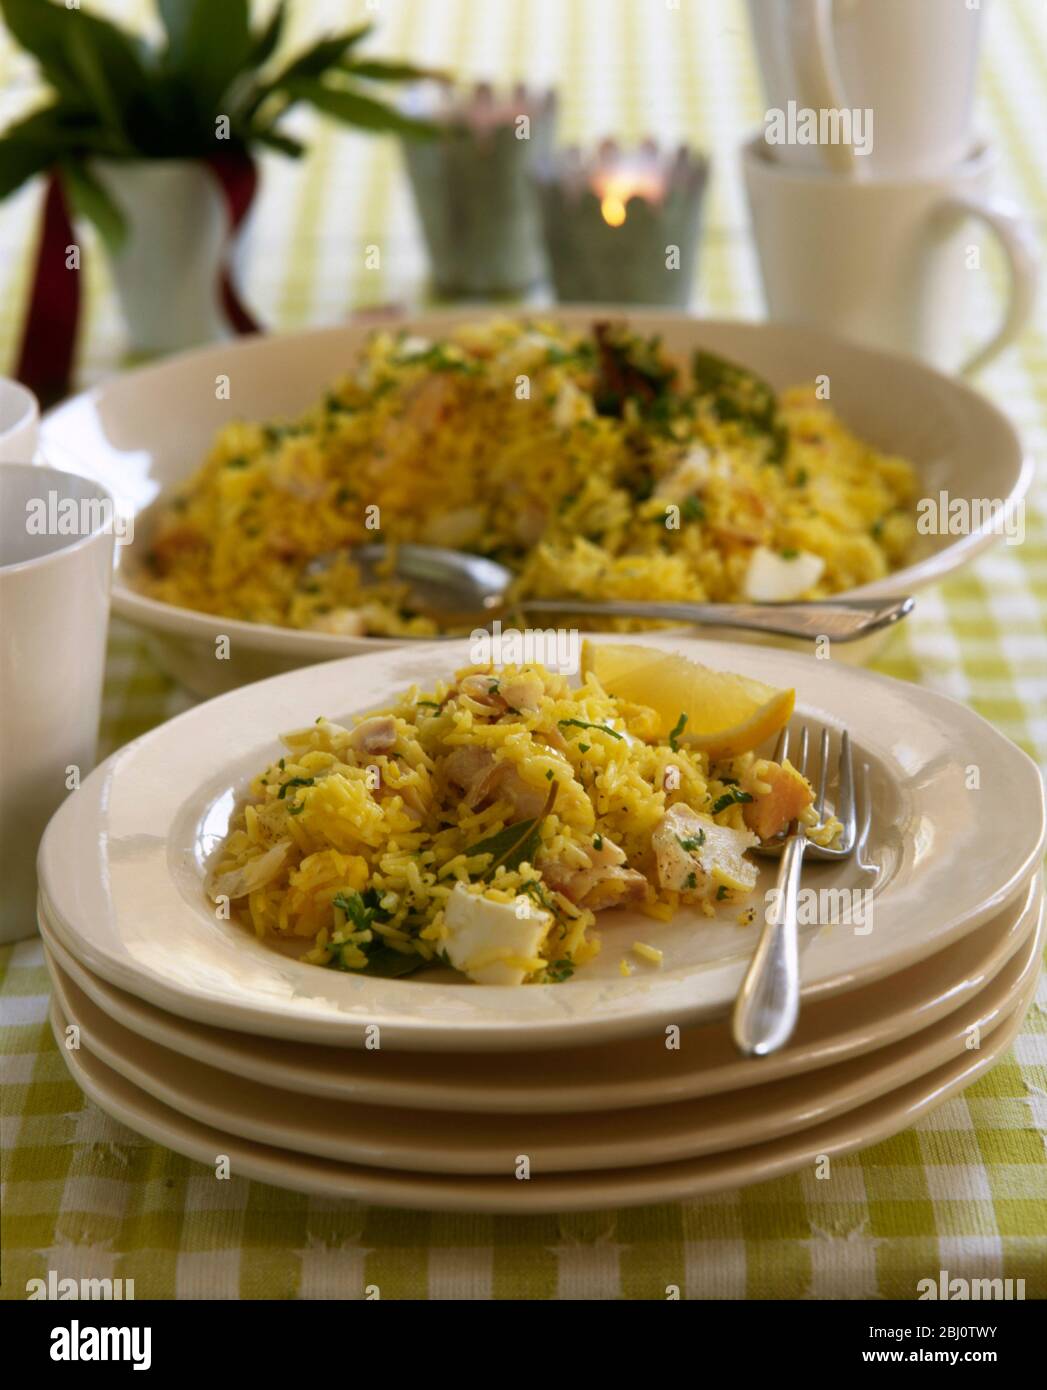 Brunch party dish of kedgeree served in dish on stack of plates with mugs and candles - Stock Photo